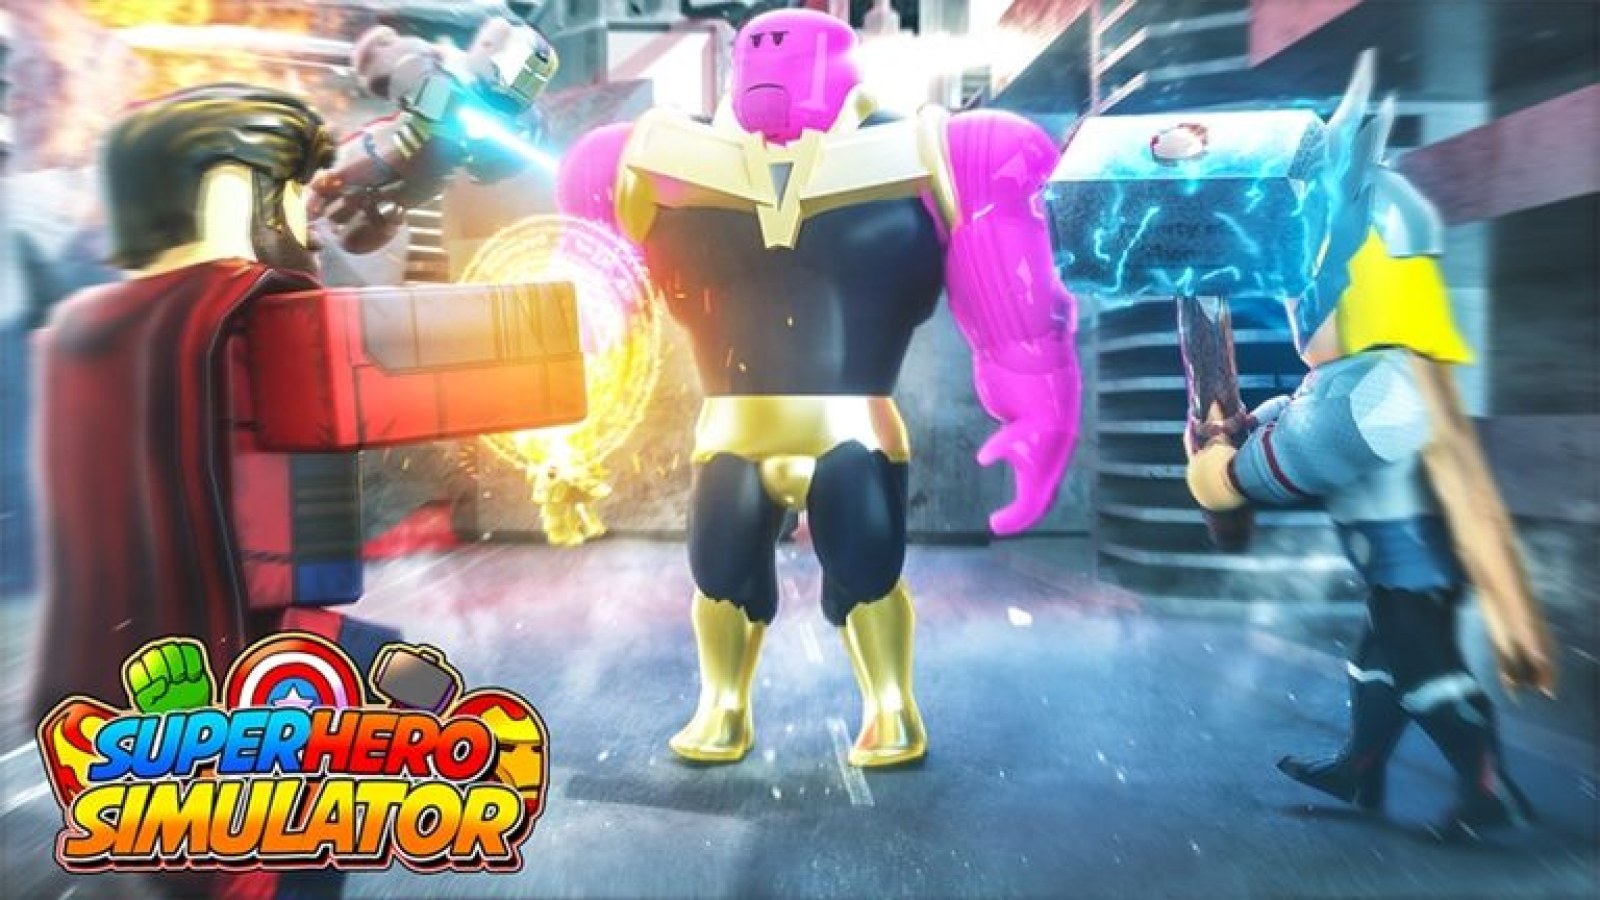 Superhero Simulator Codes All Working Roblox Codes To Get Free Coins - cheats for super power training simulator roblox